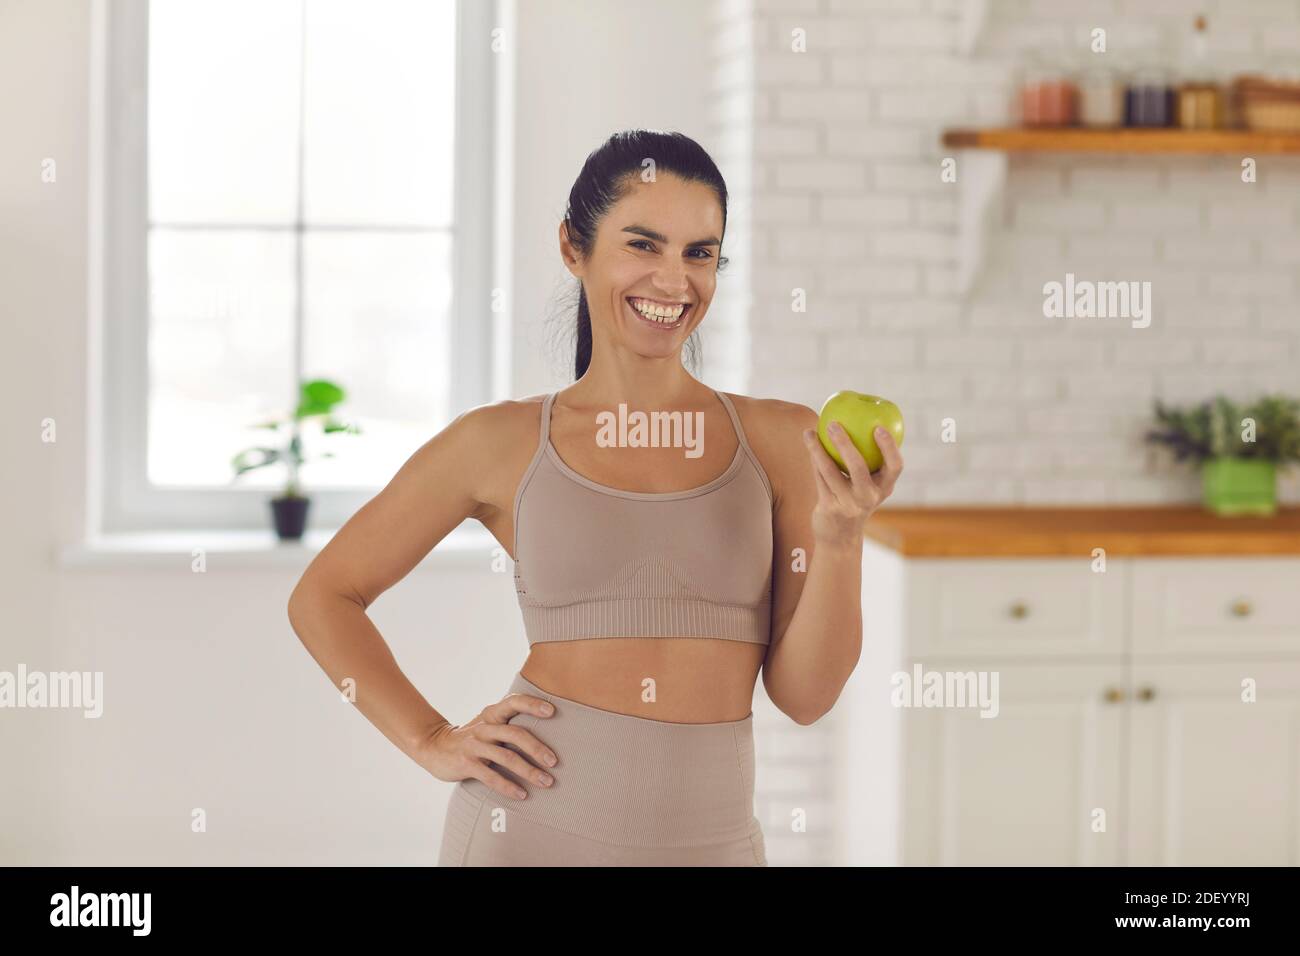 Fit woman standing in the kitchen, holding fresh green apple and smiling at camera Stock Photo